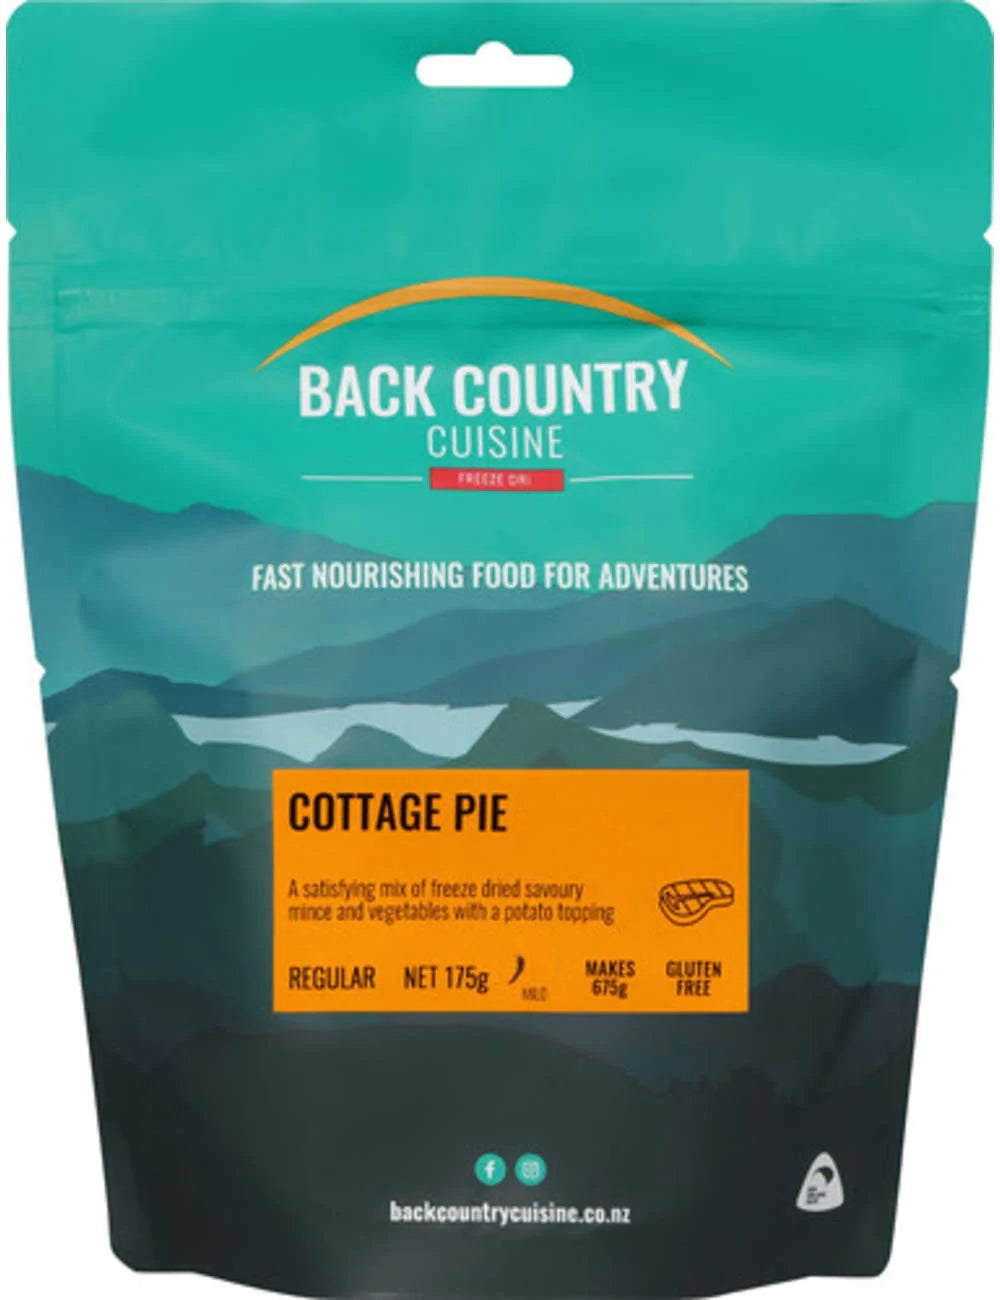 Back Country Cuisine Meals